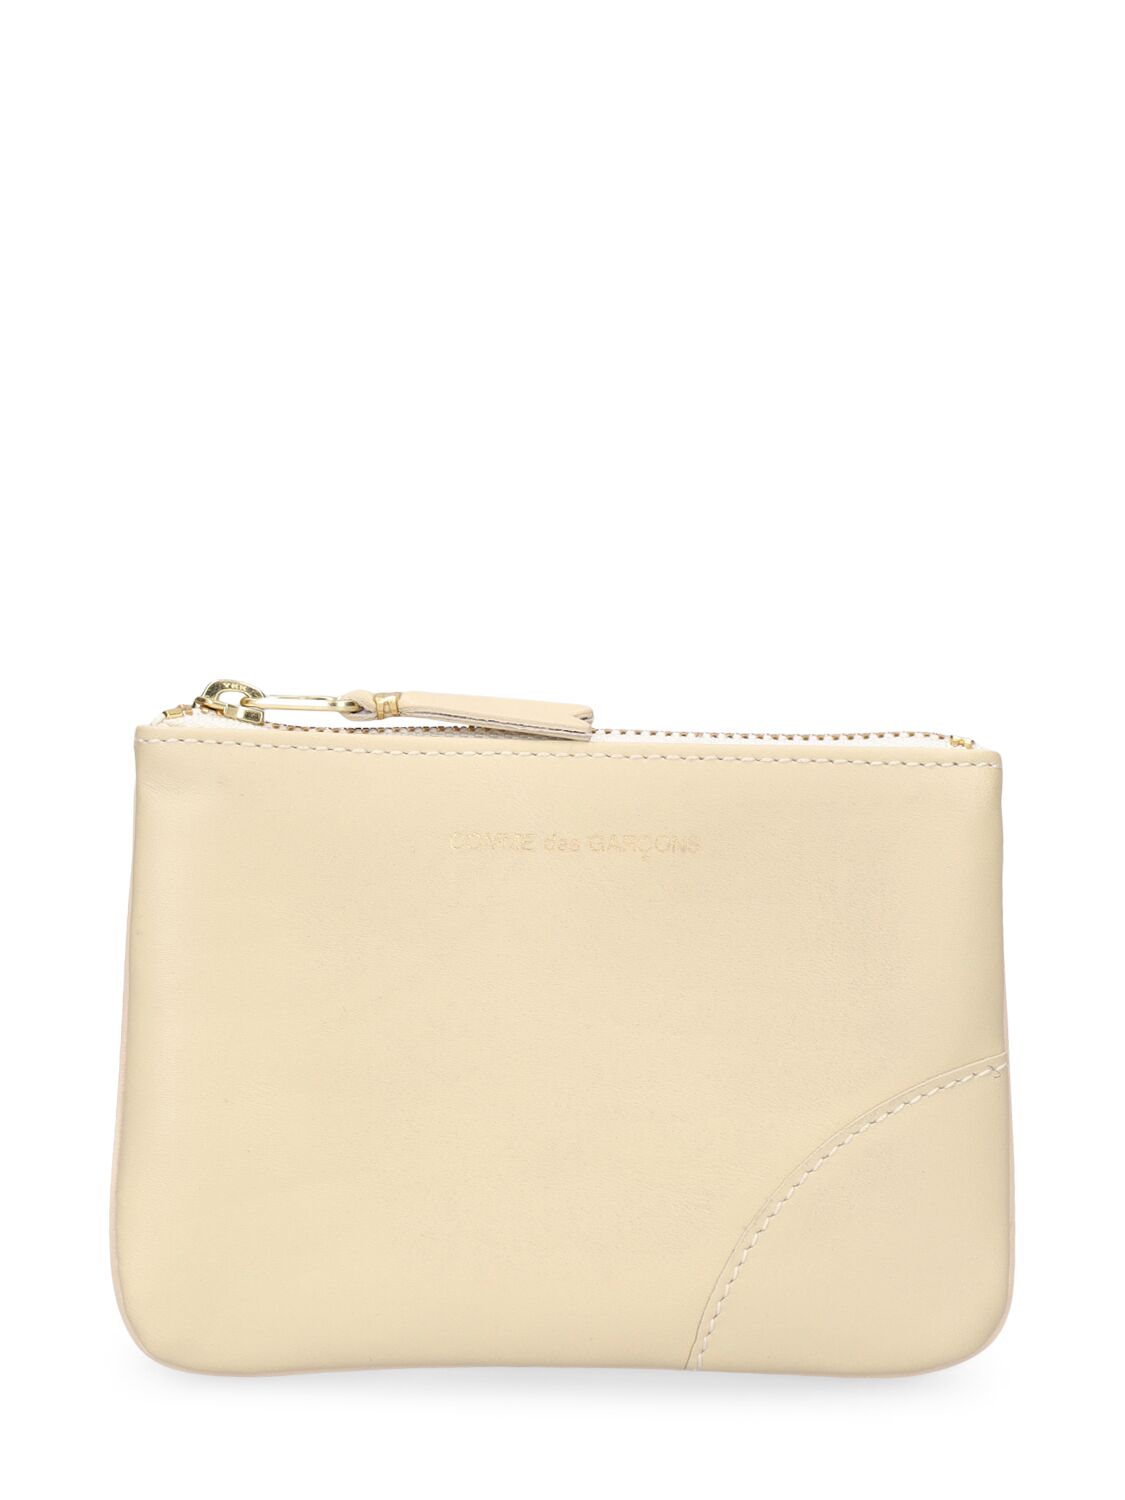 Comme Des Garçons Classic Leather Wallet In Off White